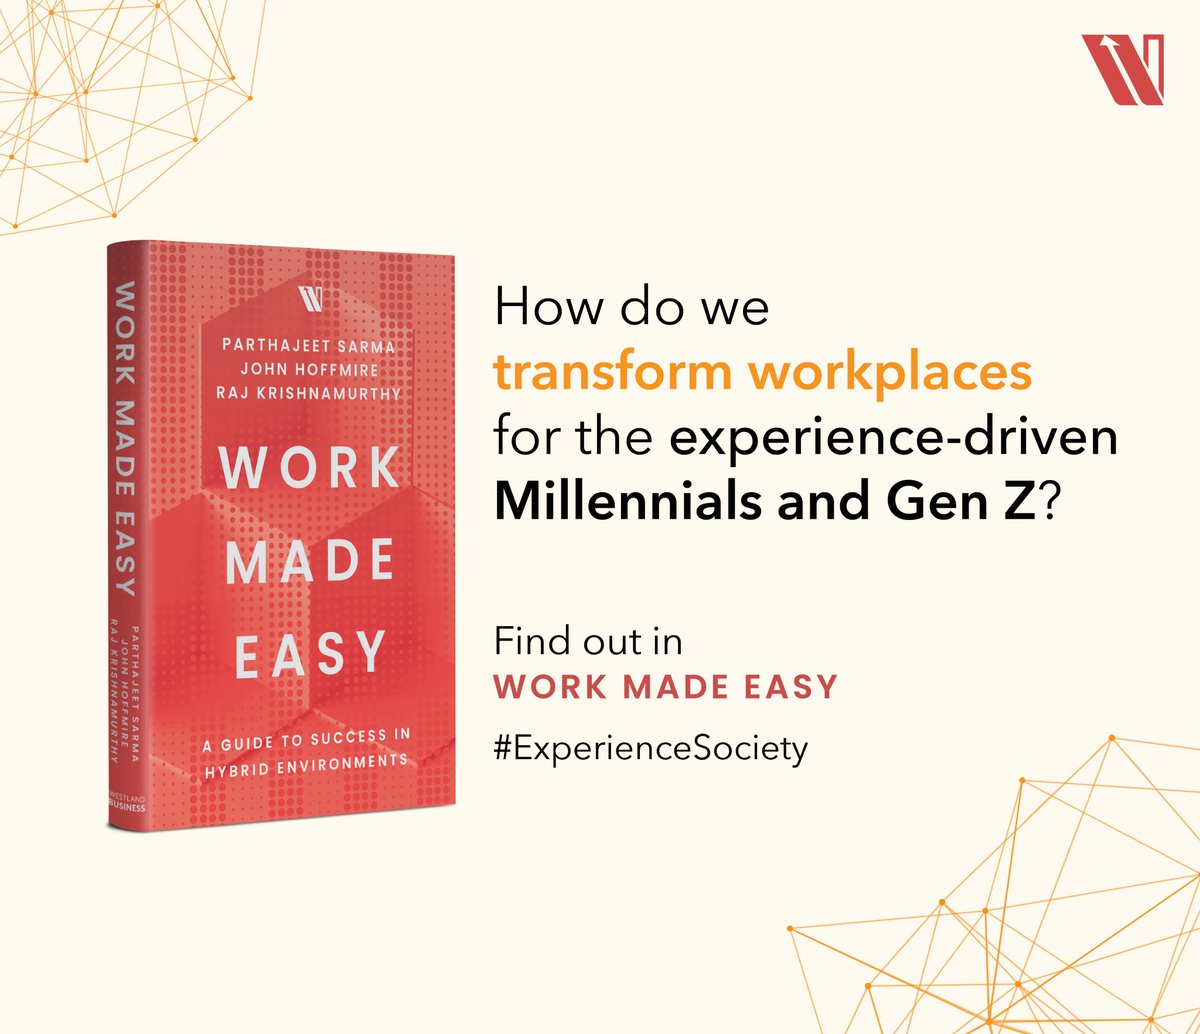 #WorkMadeEasy on Wednesday! How do you build a workplace that is seamless for different generations? Work Made Easy holds the answers for you. Buy your copy today. Available at all bookstores and online. @parthajeetsarma